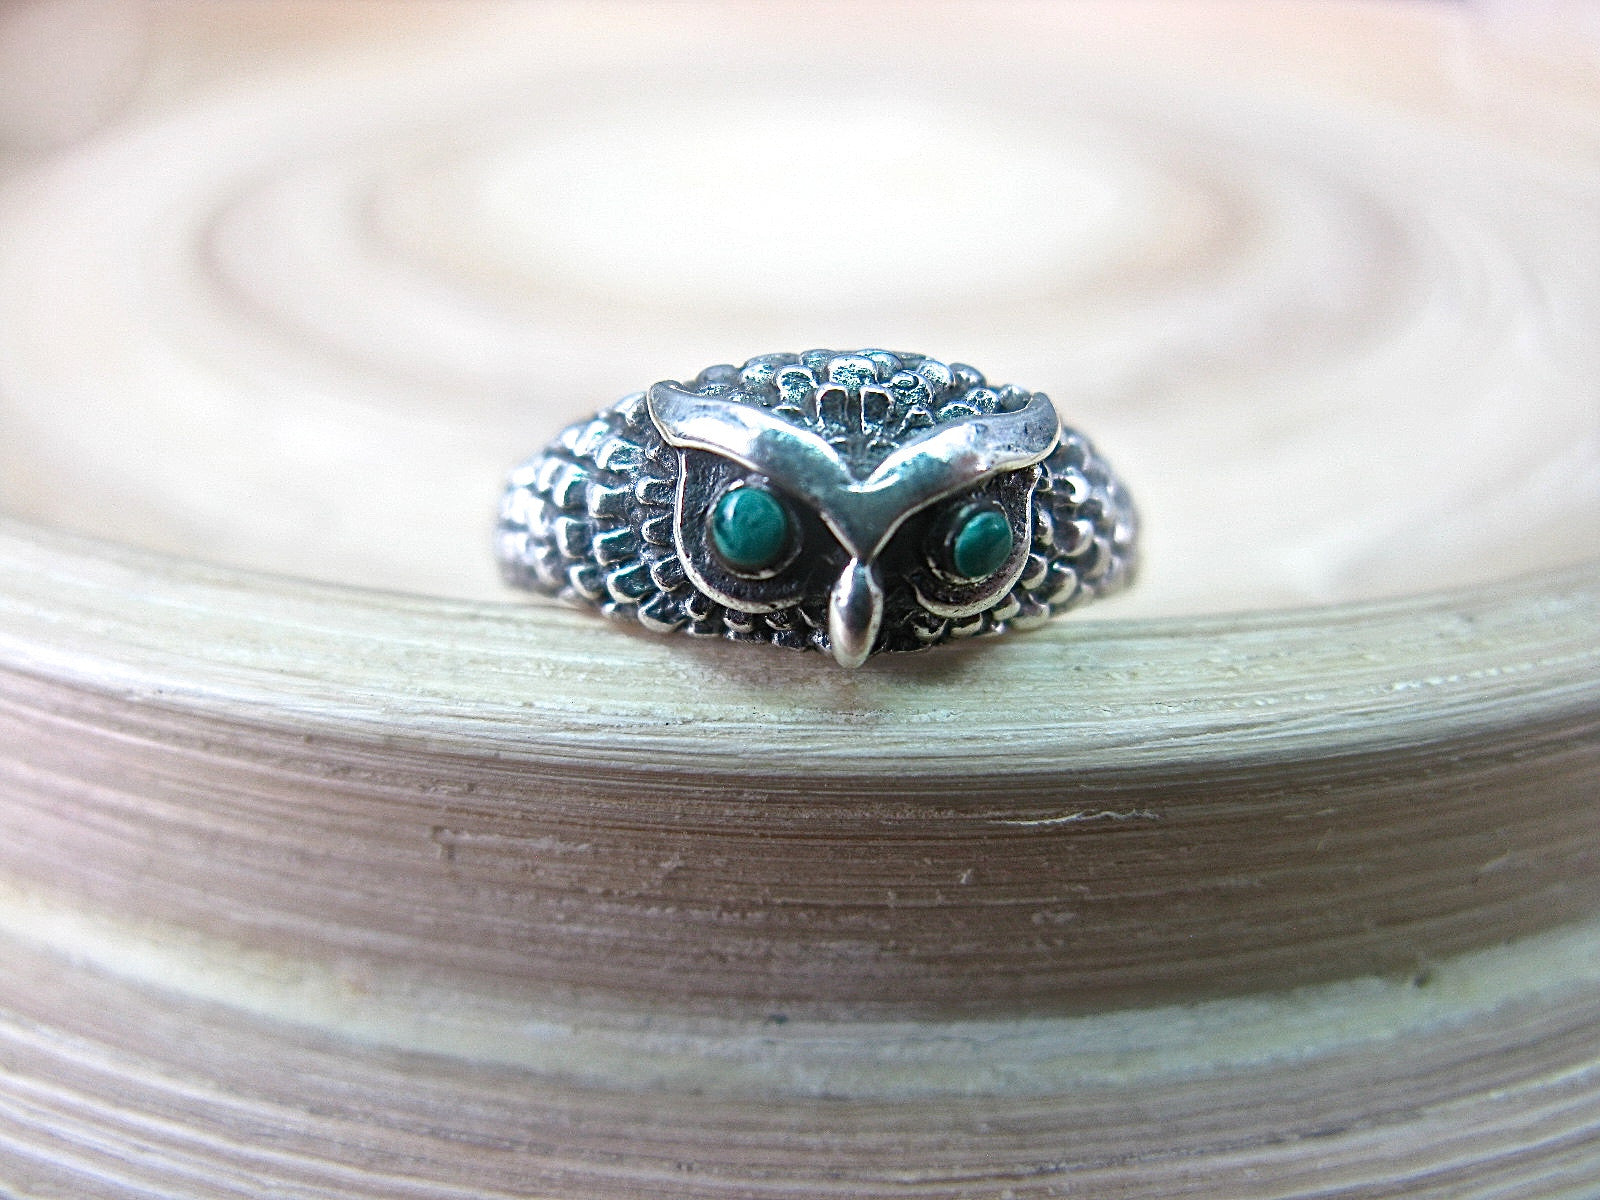 Owl Ring Turquoise in 925 Sterling Silver Ring Faith Owl - Faith Owl